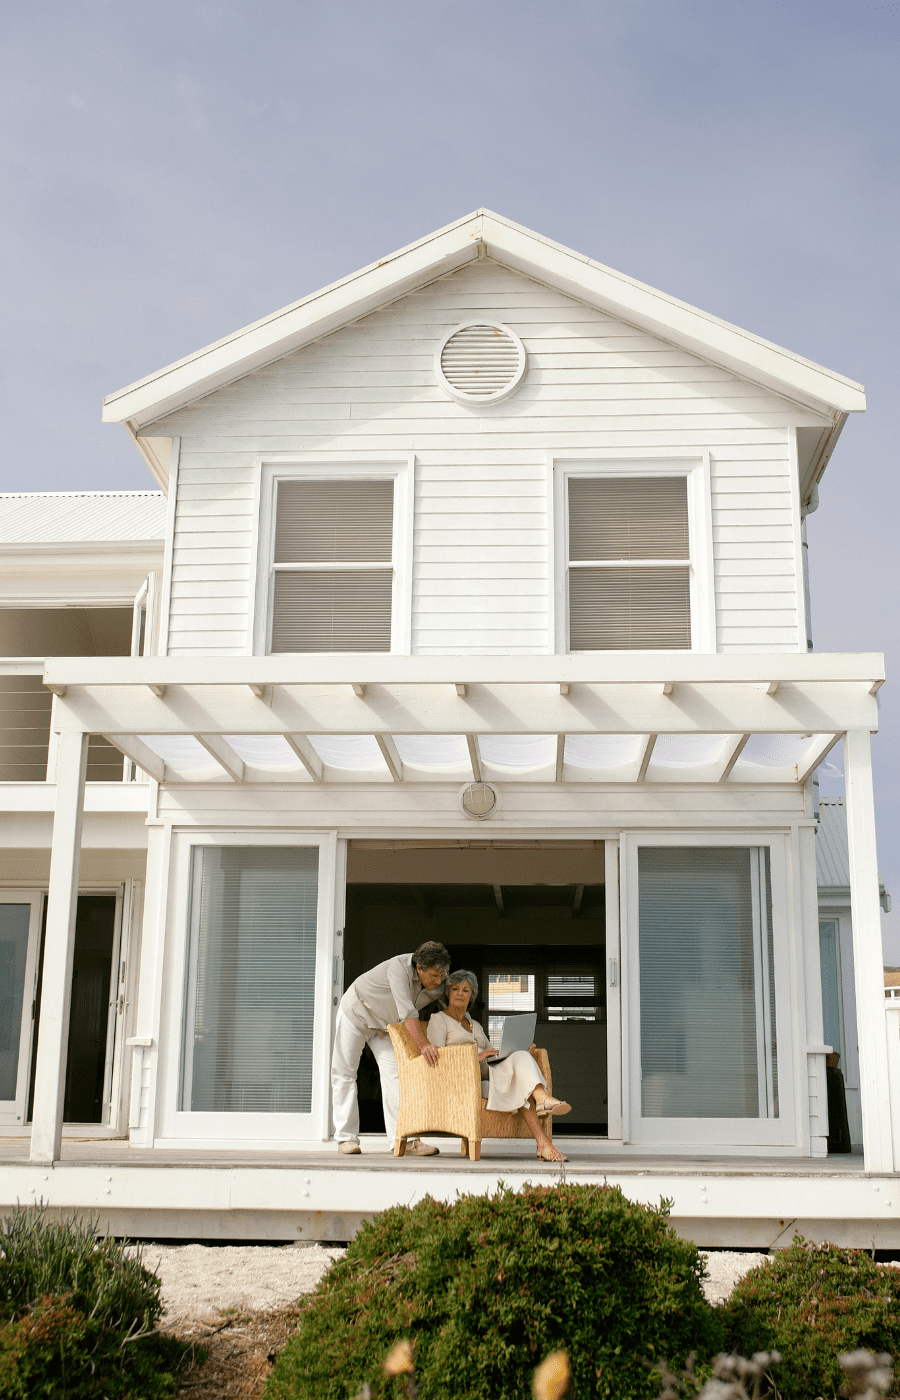 Retired Pair on Porch of Beach House